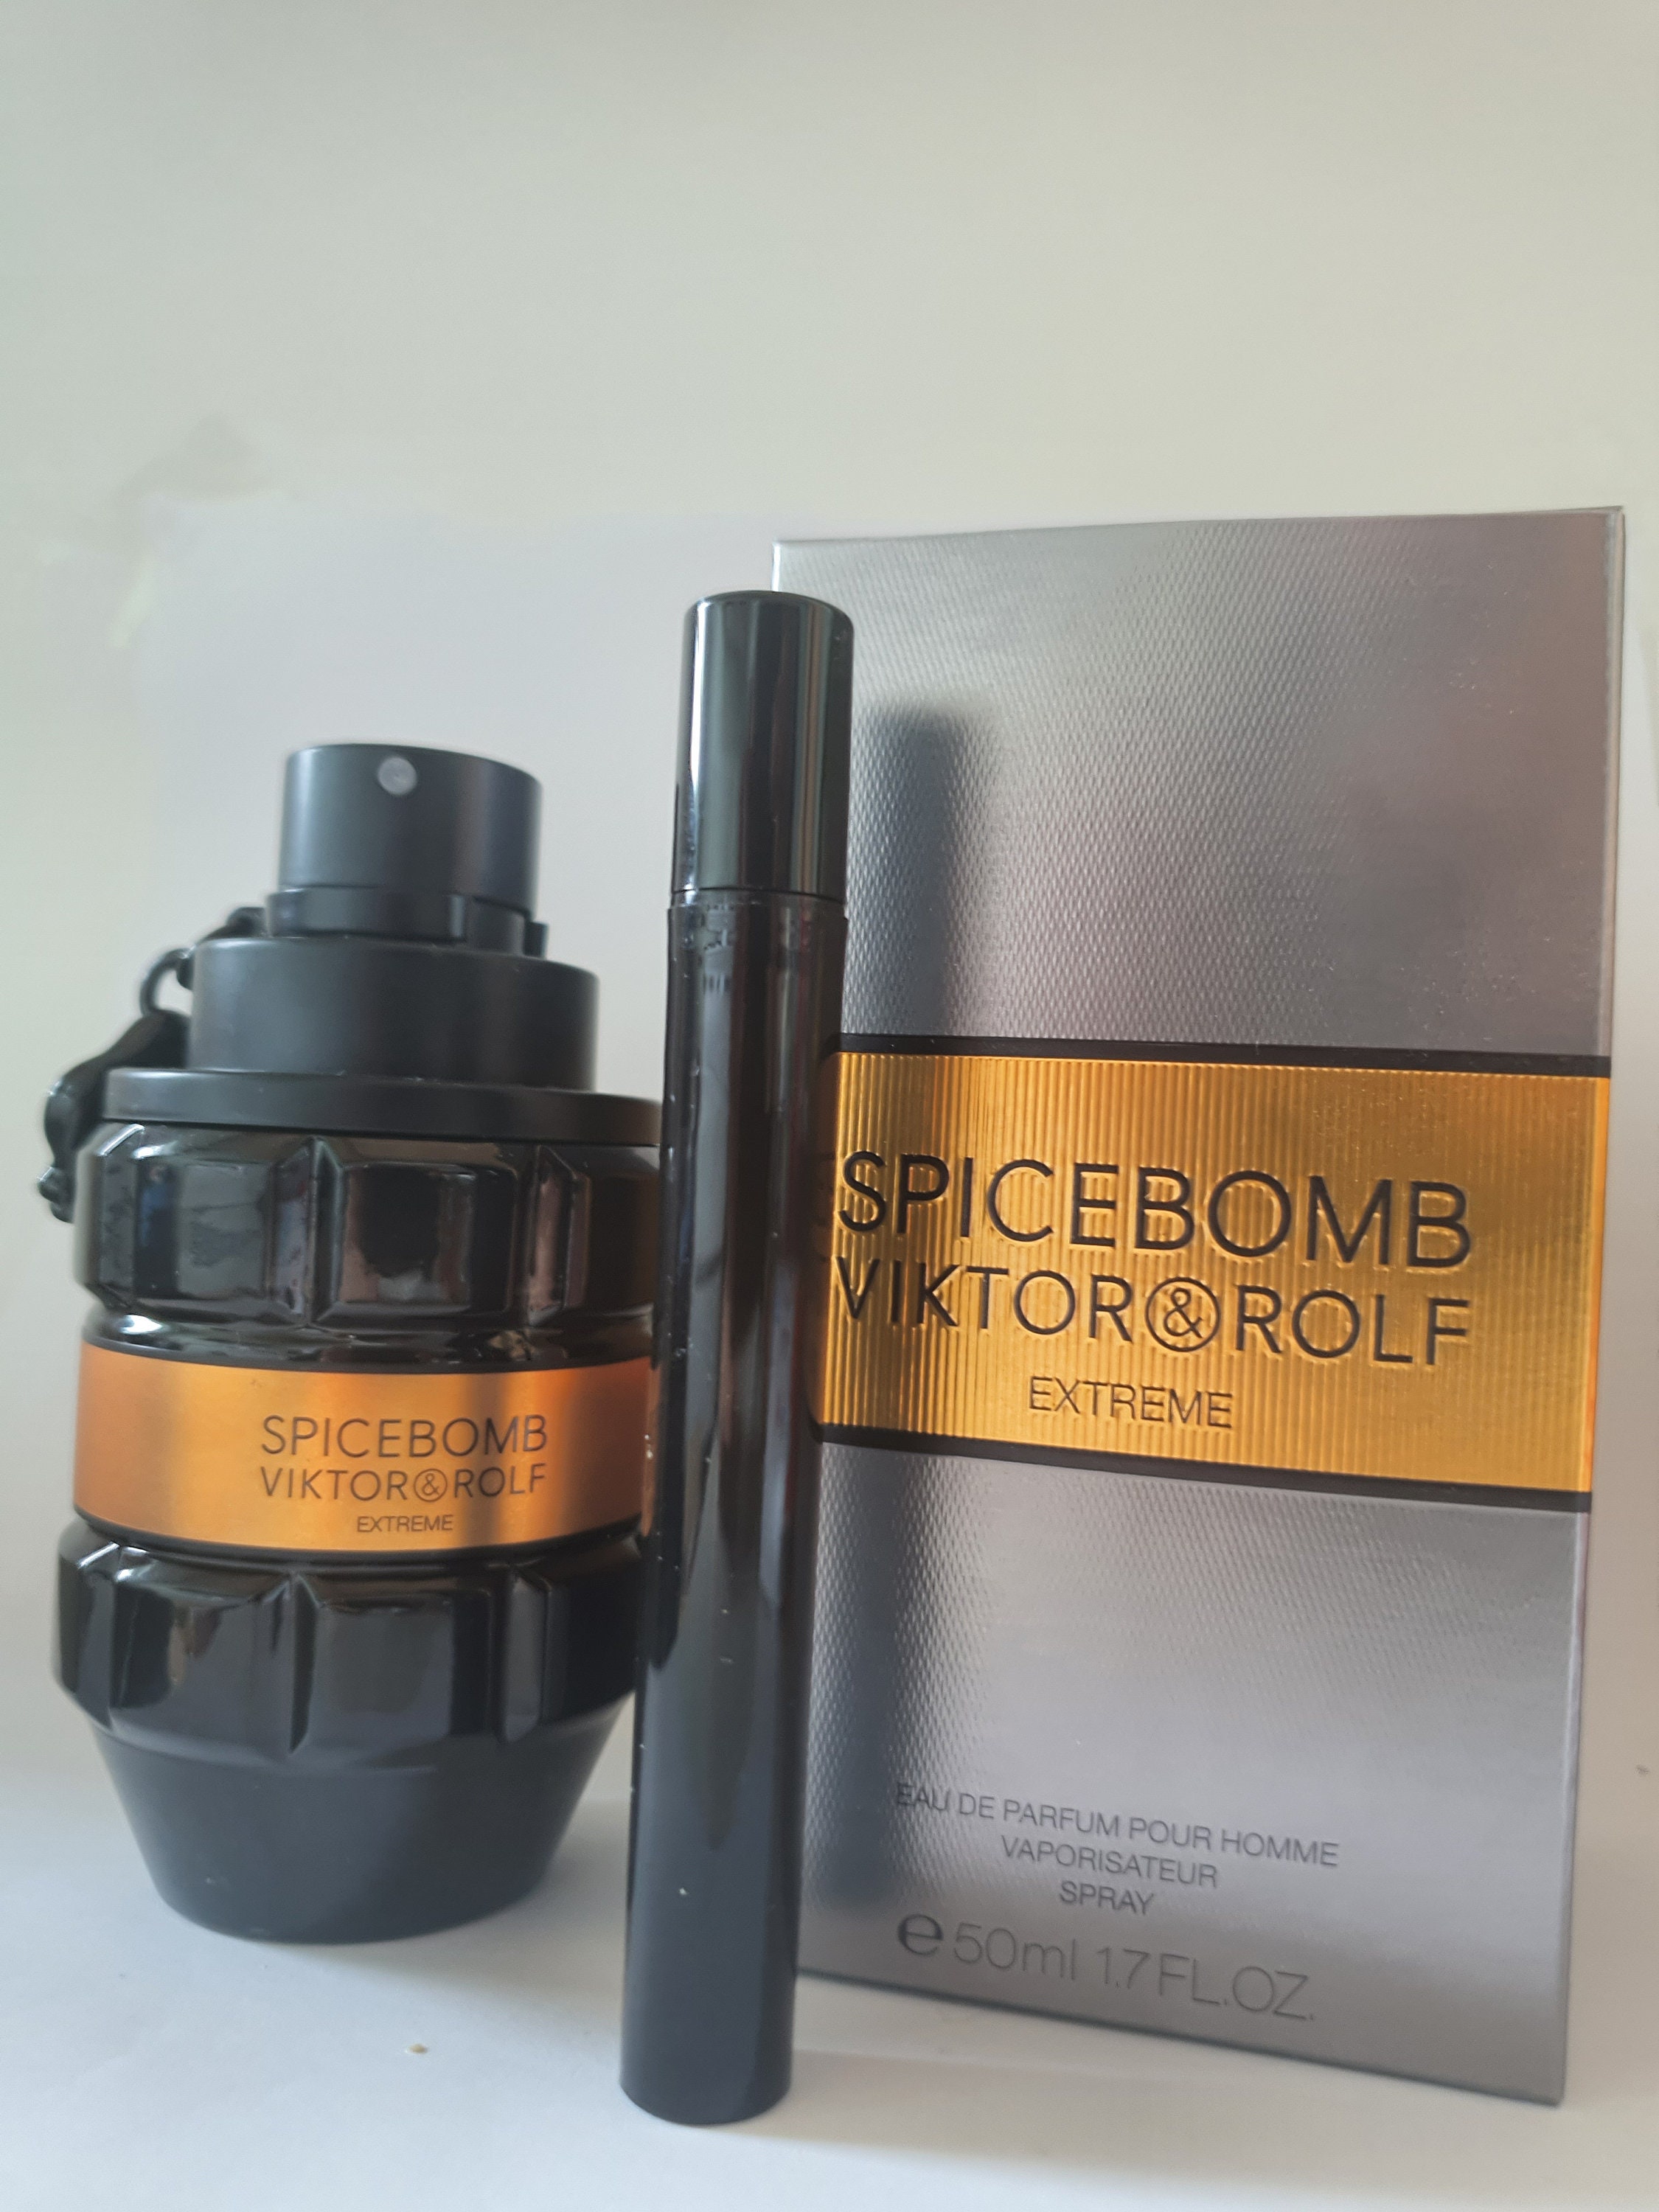 viktor and rolf spicebomb extreme for sale from me, trying to get rid of  it. : r/fragrance